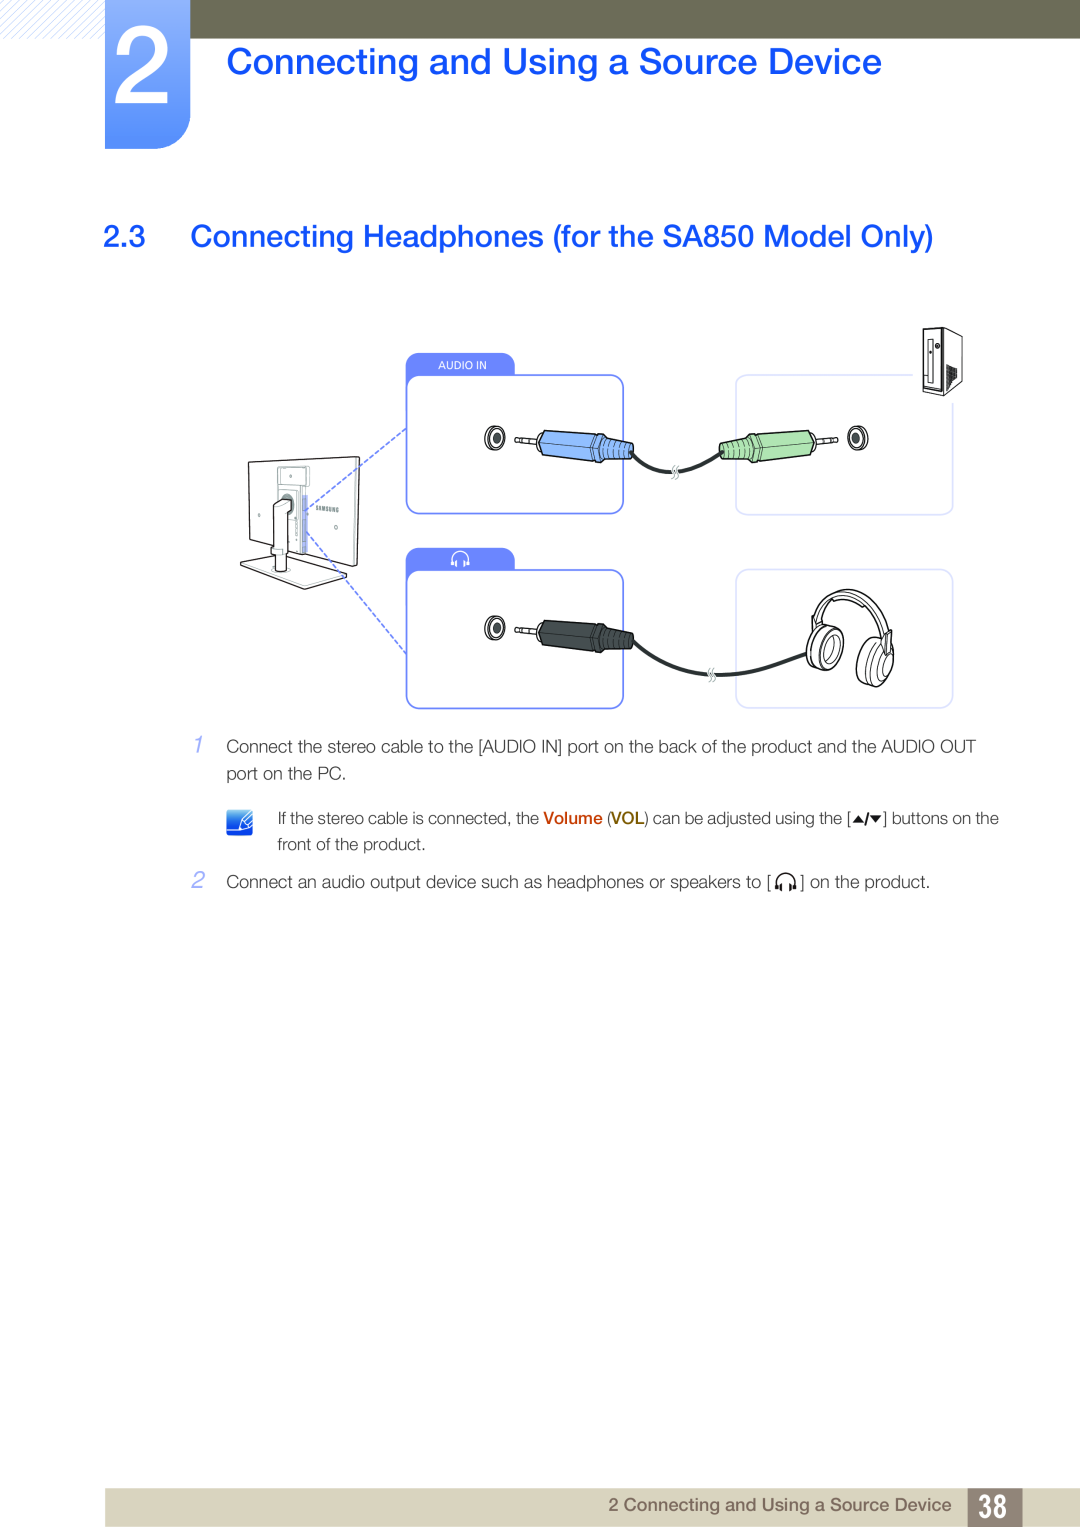 Samsung S24A850DW, S22A650D, S27A650D Connecting Headphones for the SA850 Model Only, Connecting and Using a Source Device 